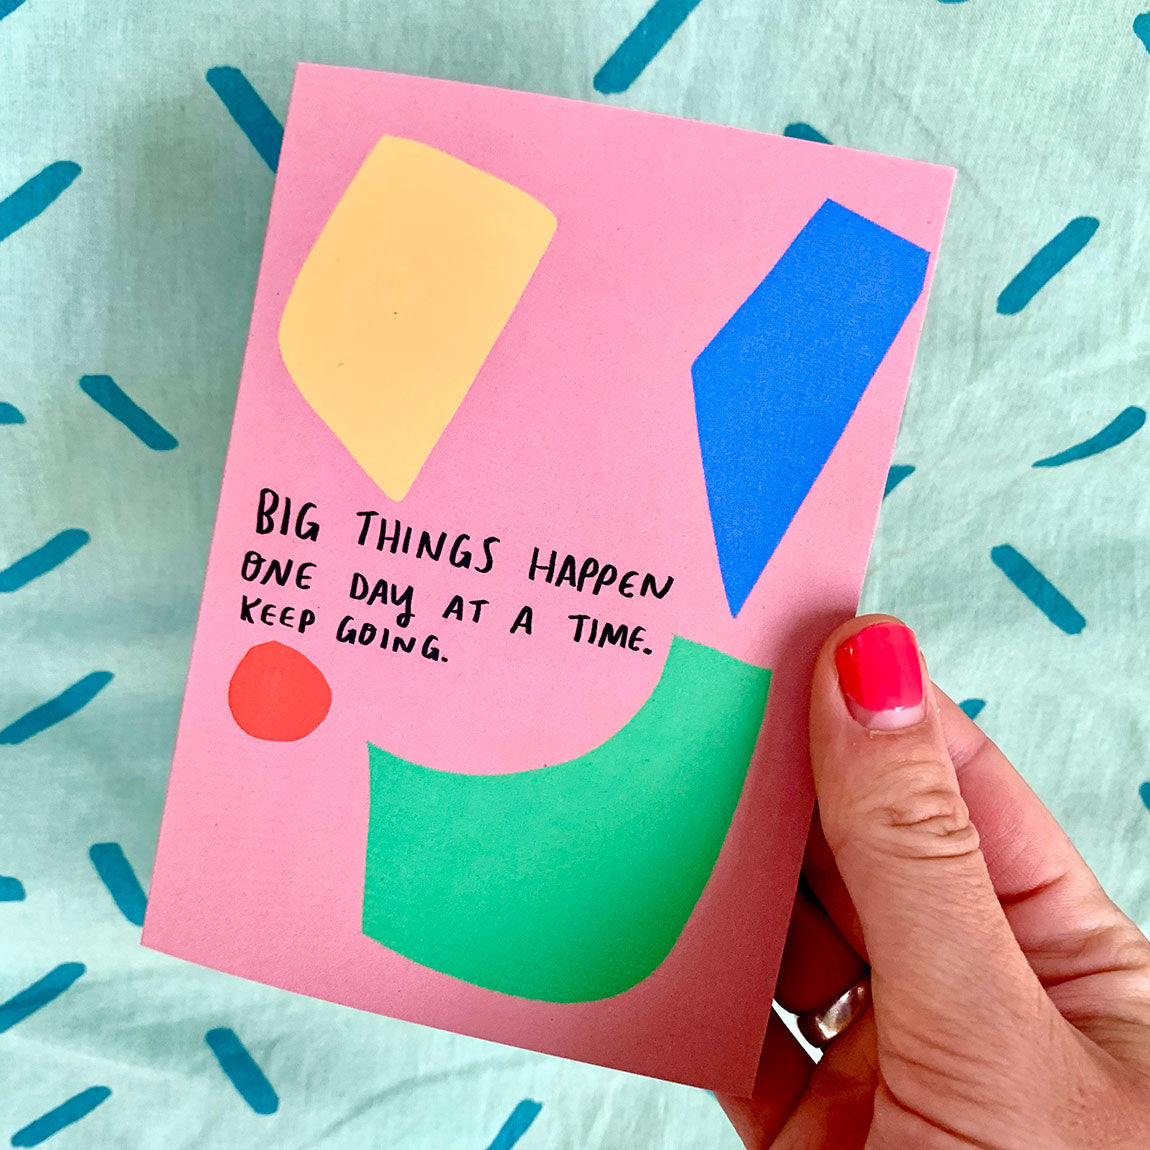 Big things happen (one day at a time) card